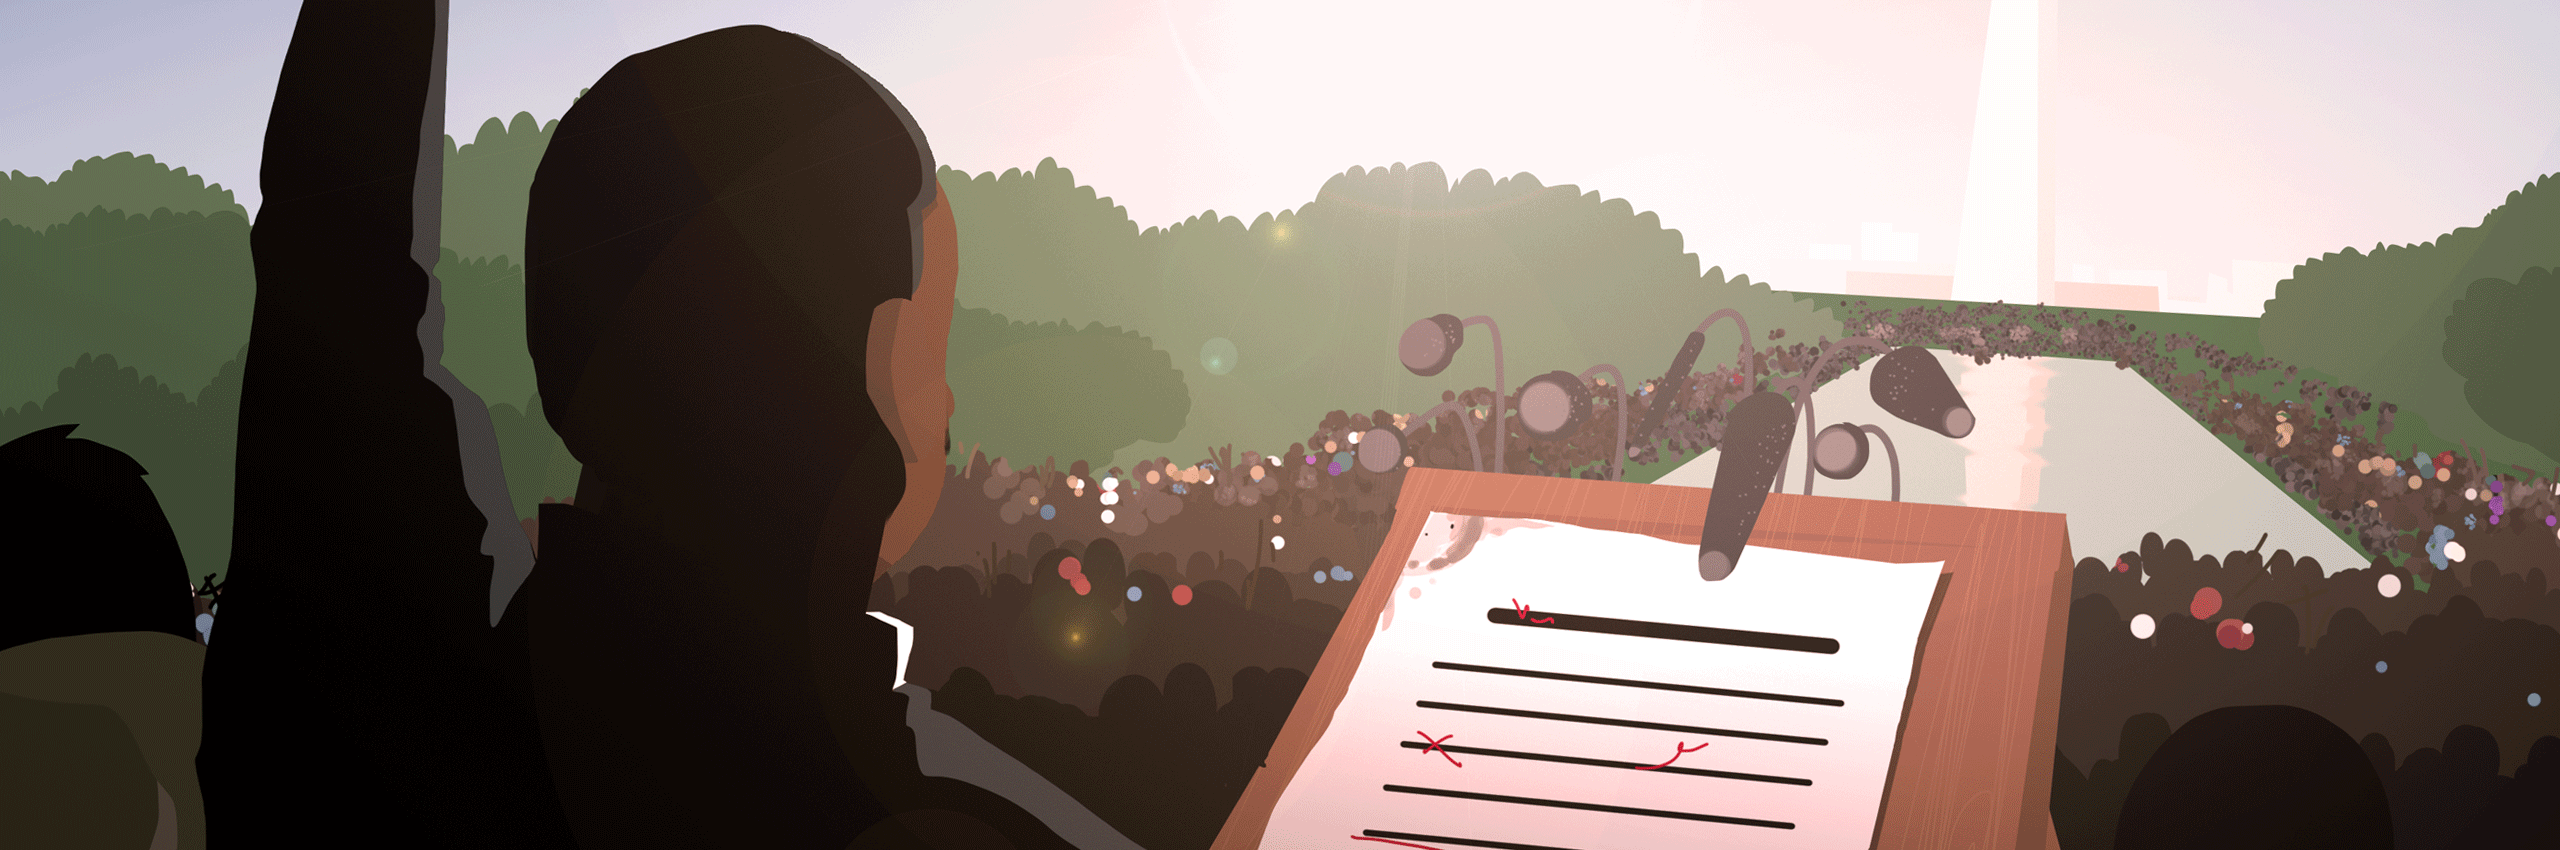 Illustration of King giving I have a dream speech